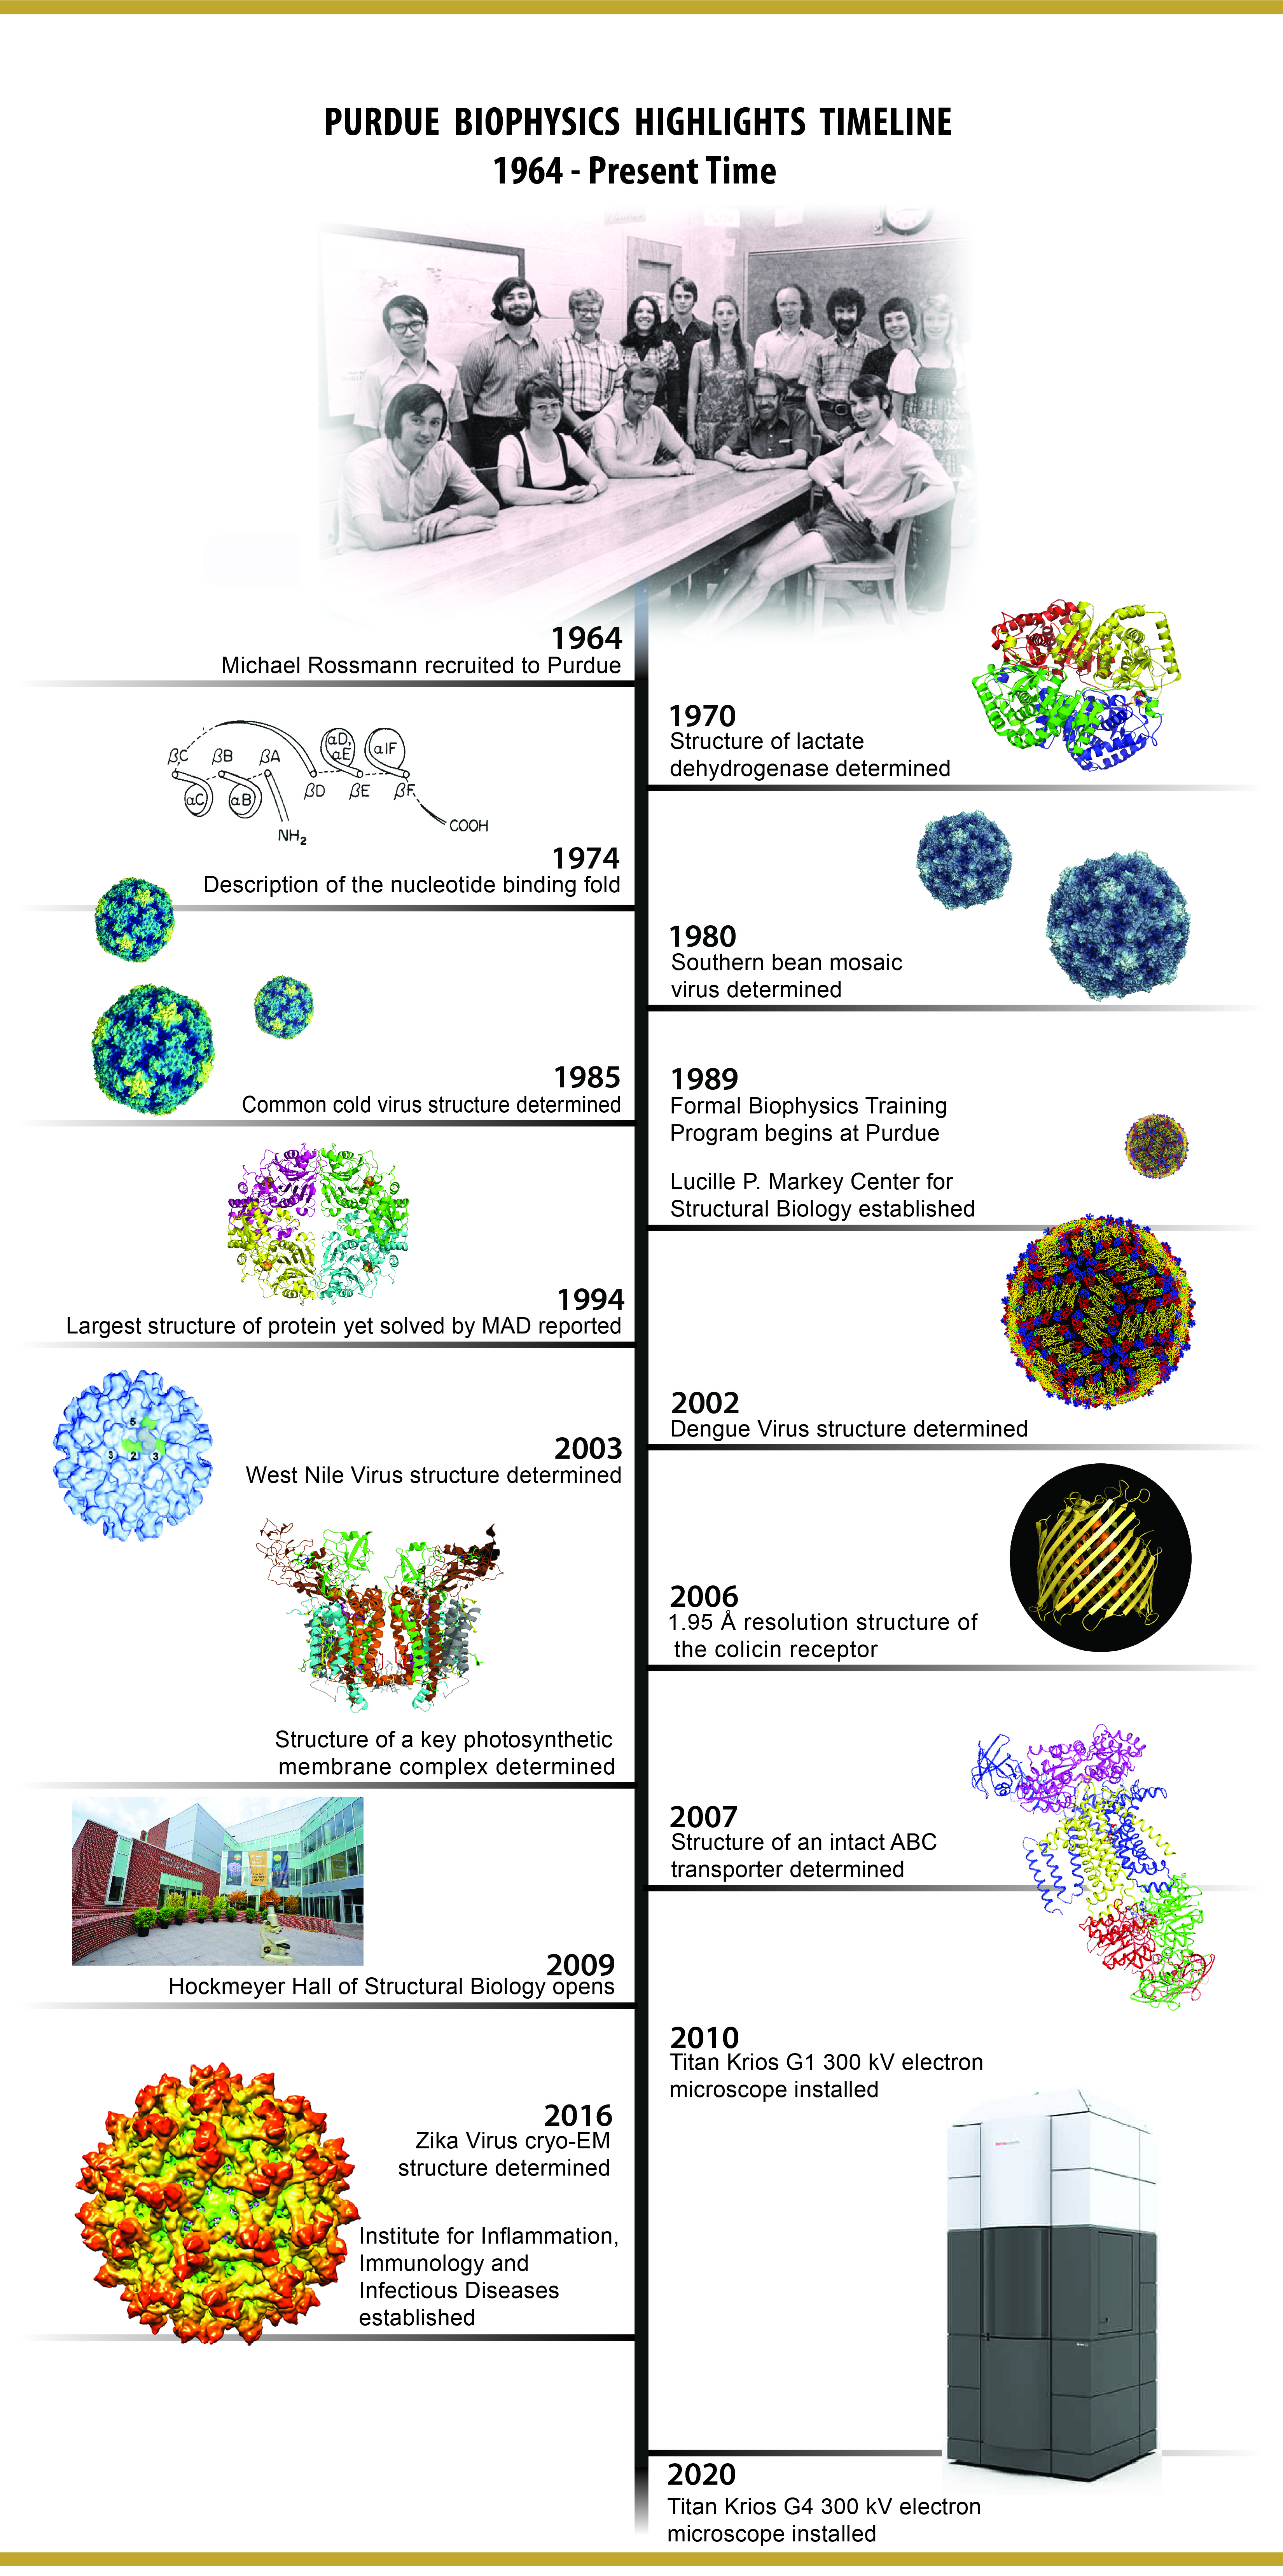 Highlights of the history of biophysics from 1964 to the present